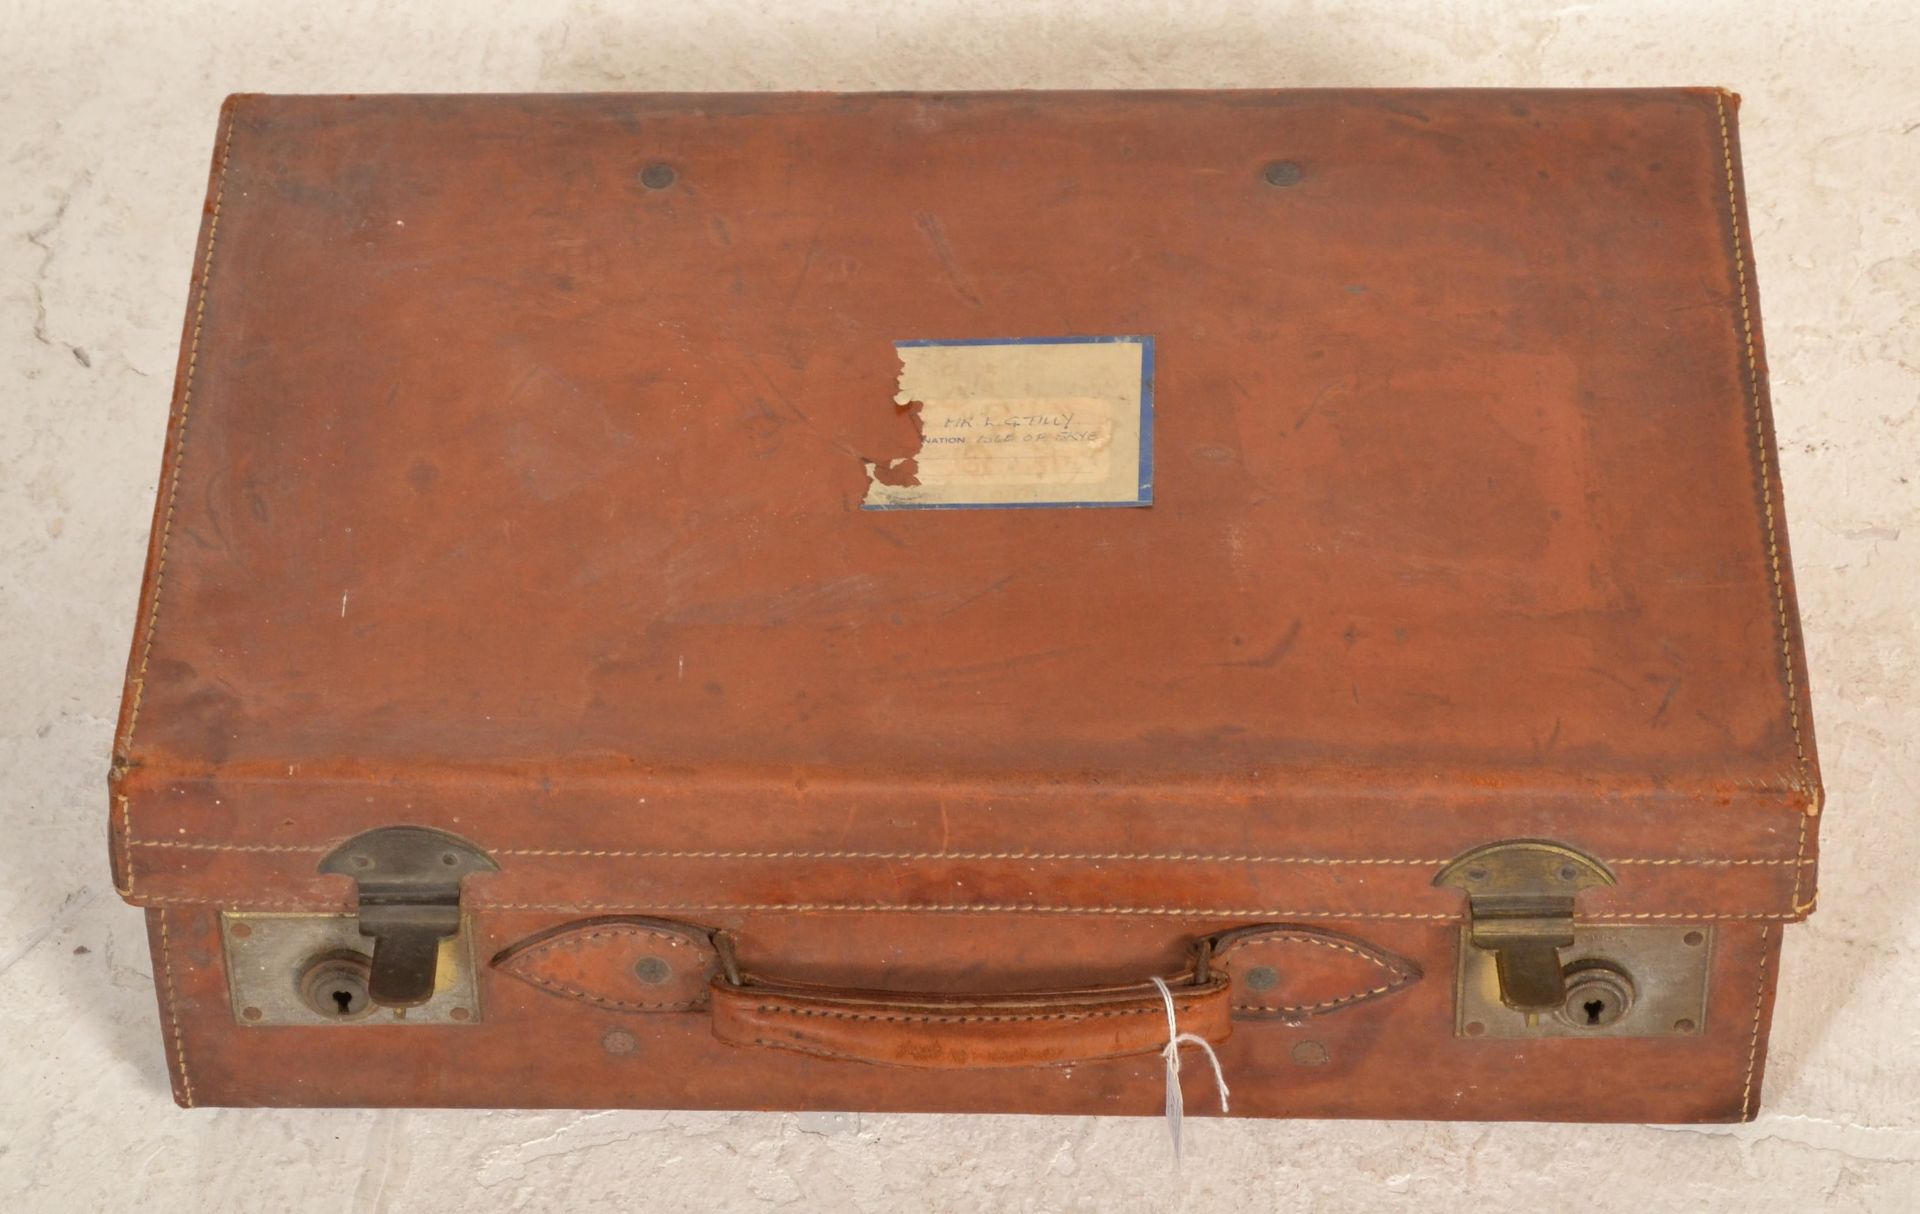 A good quality early 20th century leather suitcase with clasp locks and leather handles, remains - Image 3 of 4